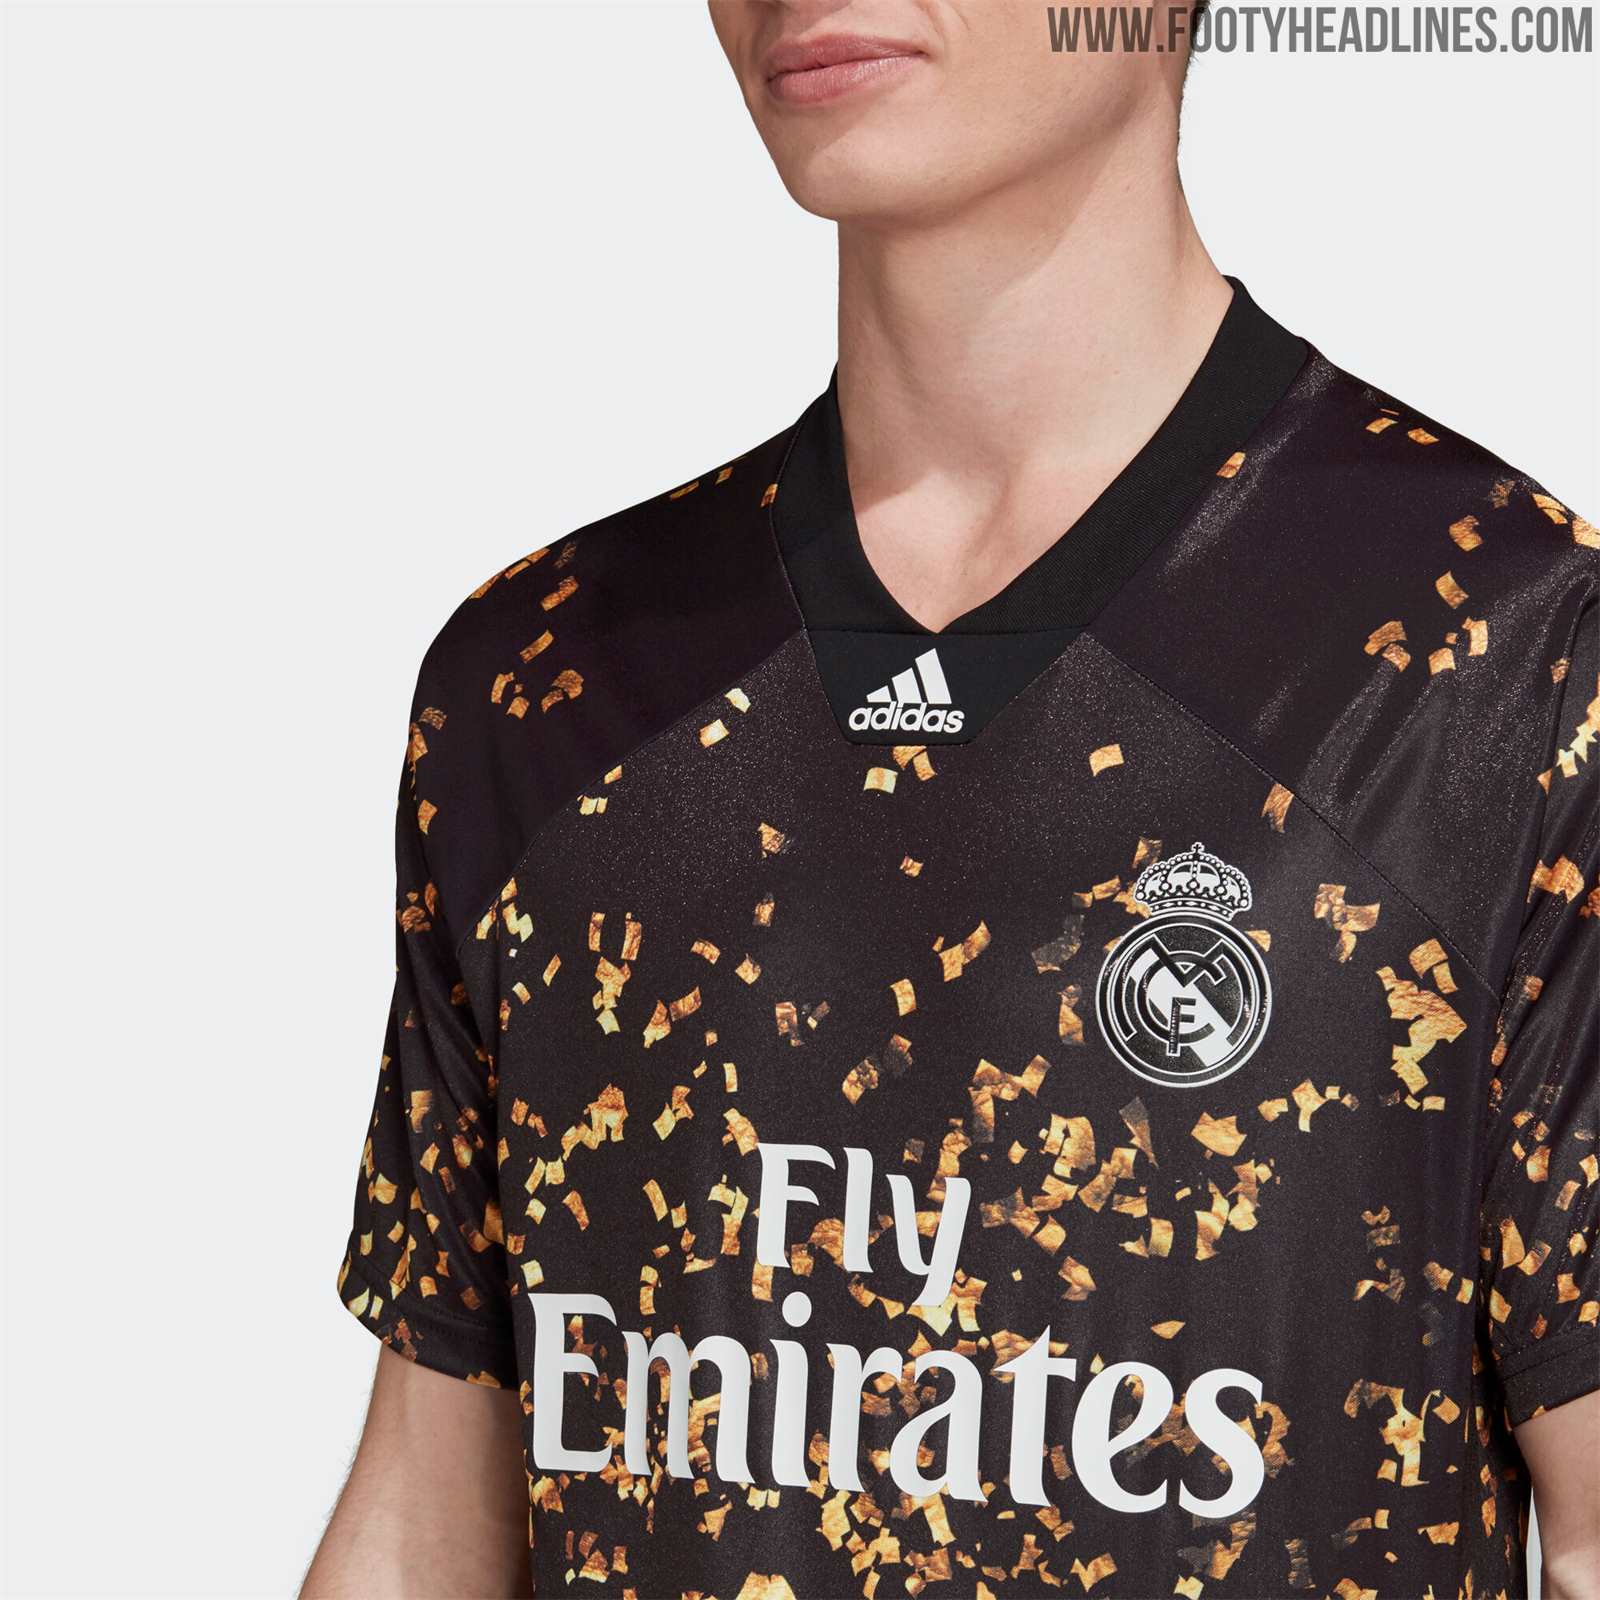 real madrid ea sports jersey